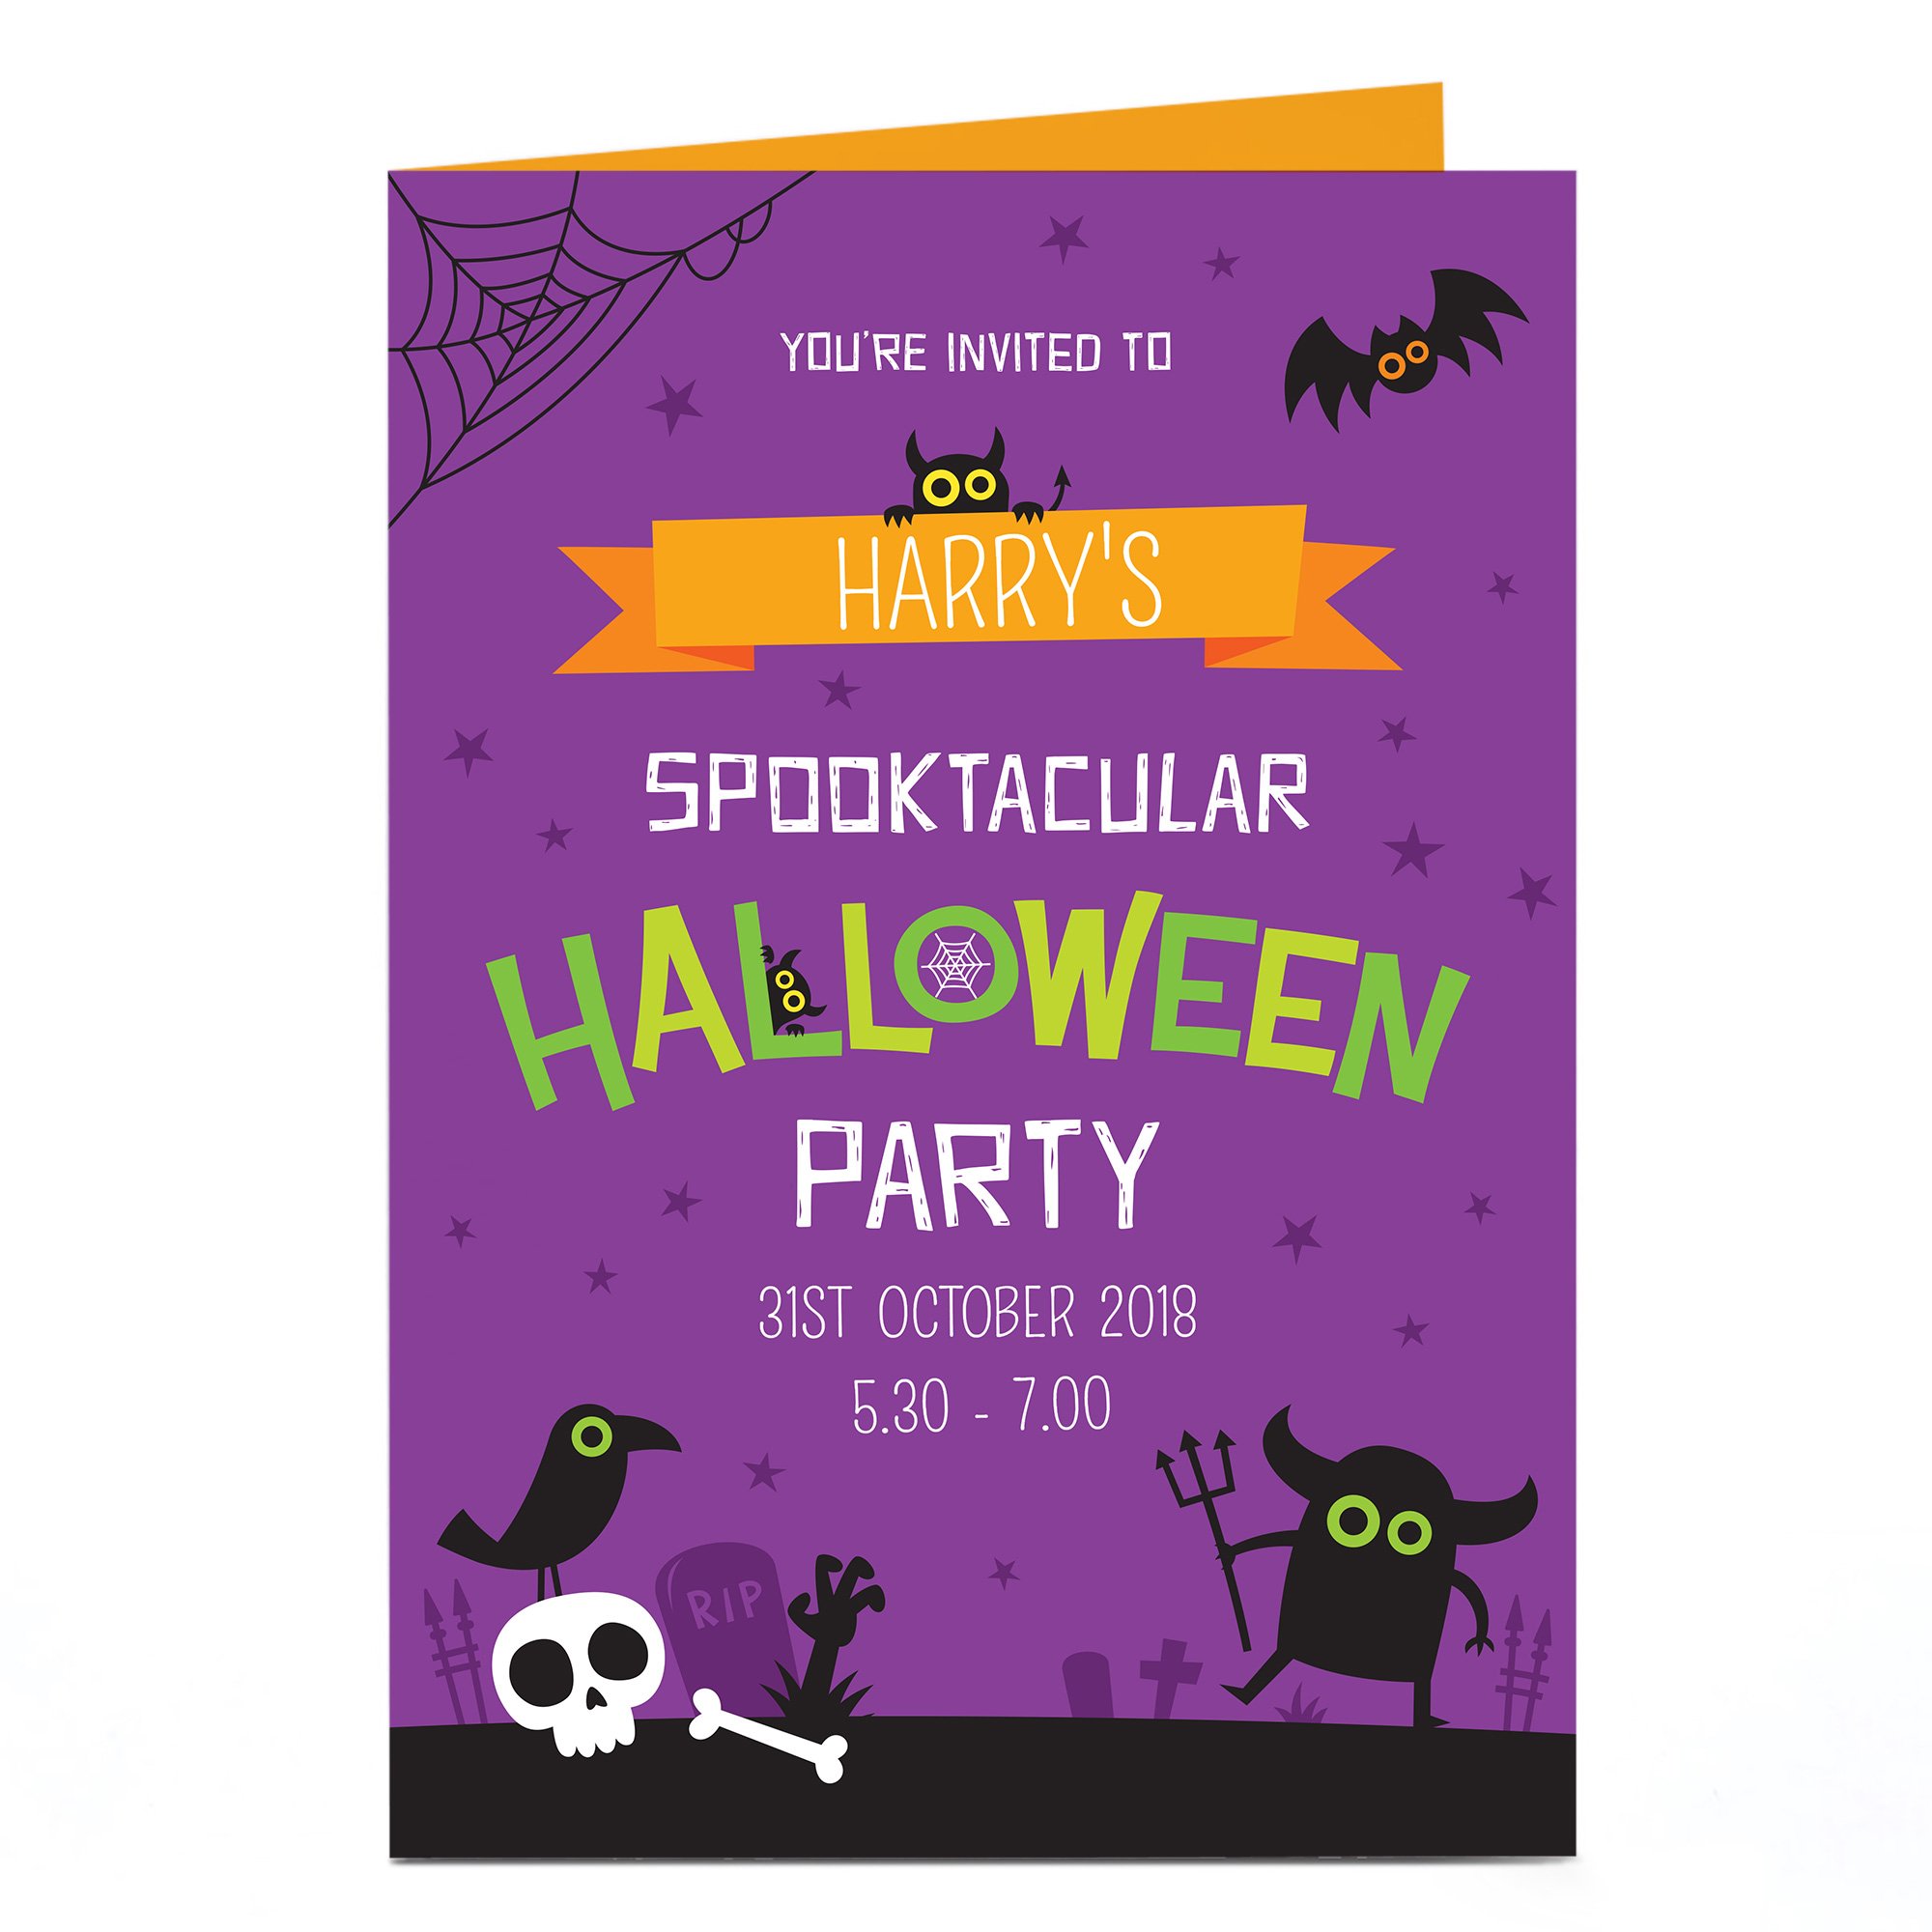 Personalised Halloween Party Invitation - Spooktacular